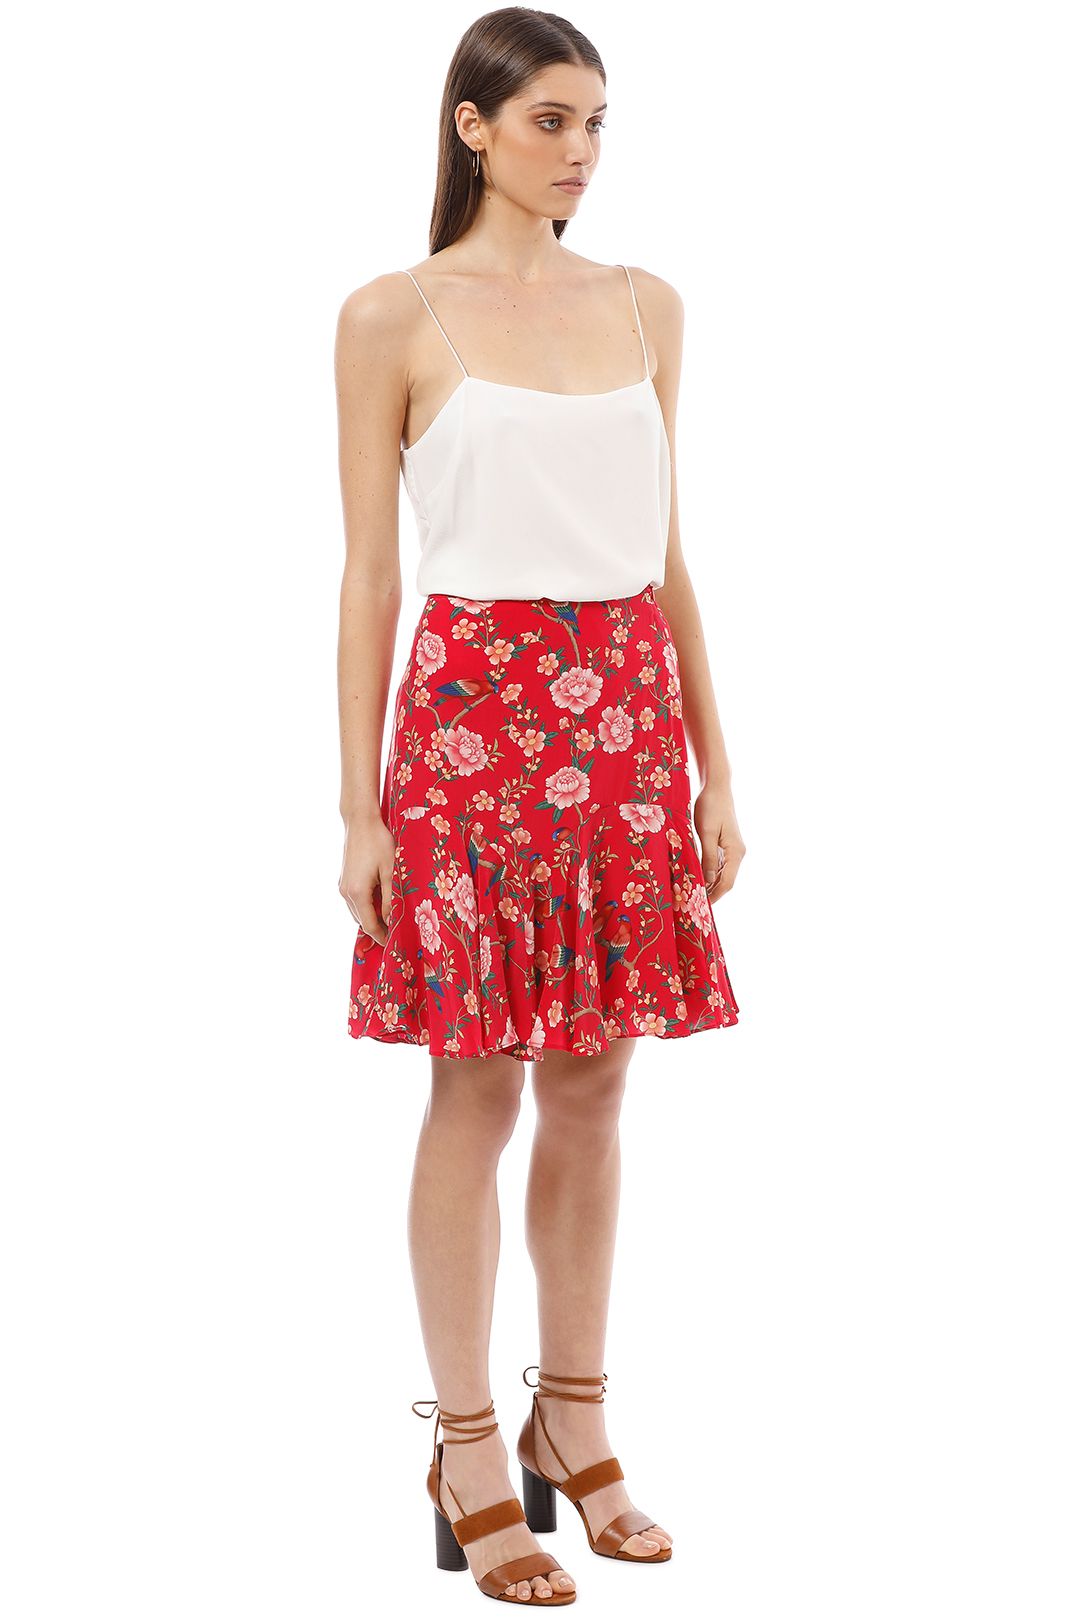 Alannah Hill - Own Wings Skirt - Red - Side